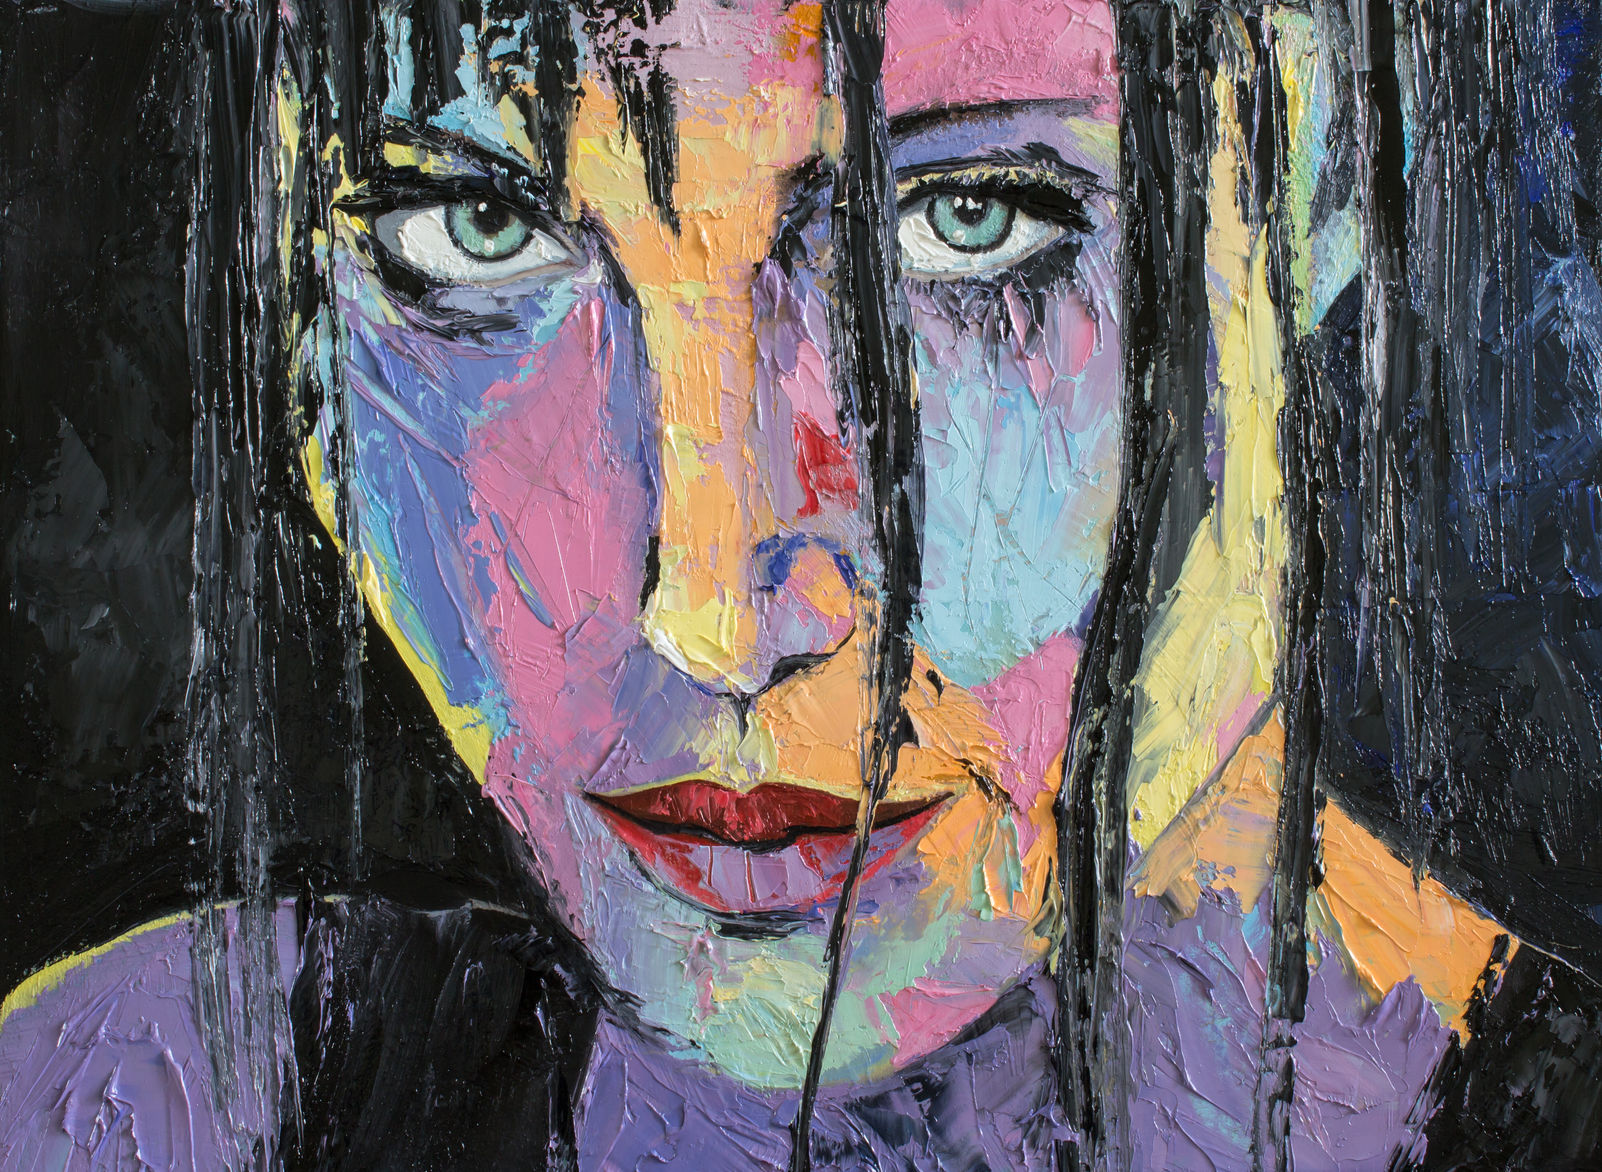 47935701 - fatnasy portrait of a girl in gestural style. original oil painting "i know".